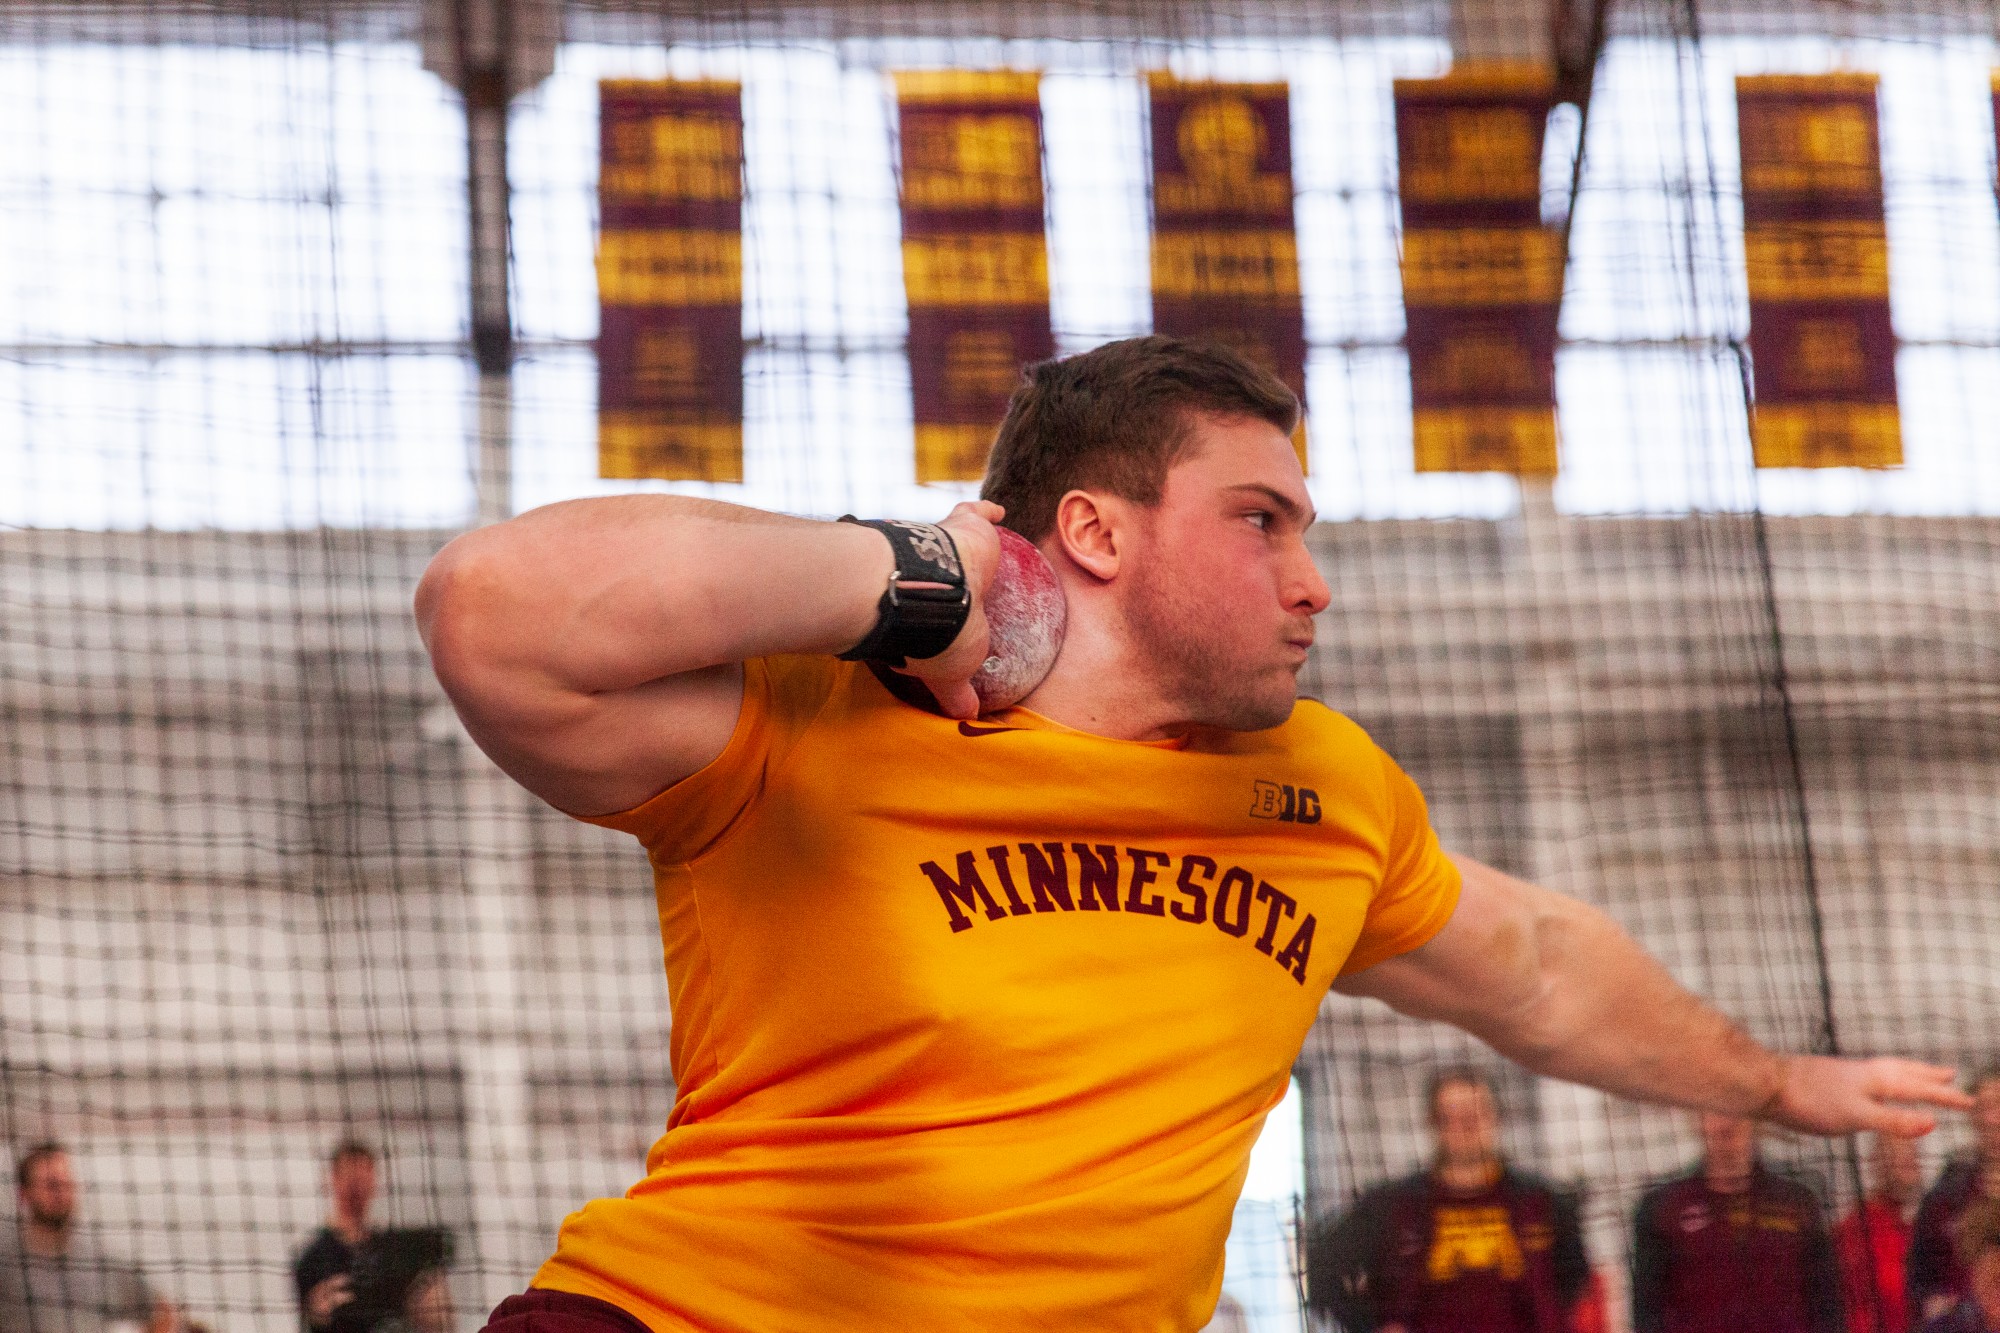 Gophers Redshirt Senior Jonathan Tharaldsen competes in the shot put at the Minnesota Cold Classic at the University of Minnesota Fieldhouse on Friday, Feb. 21.